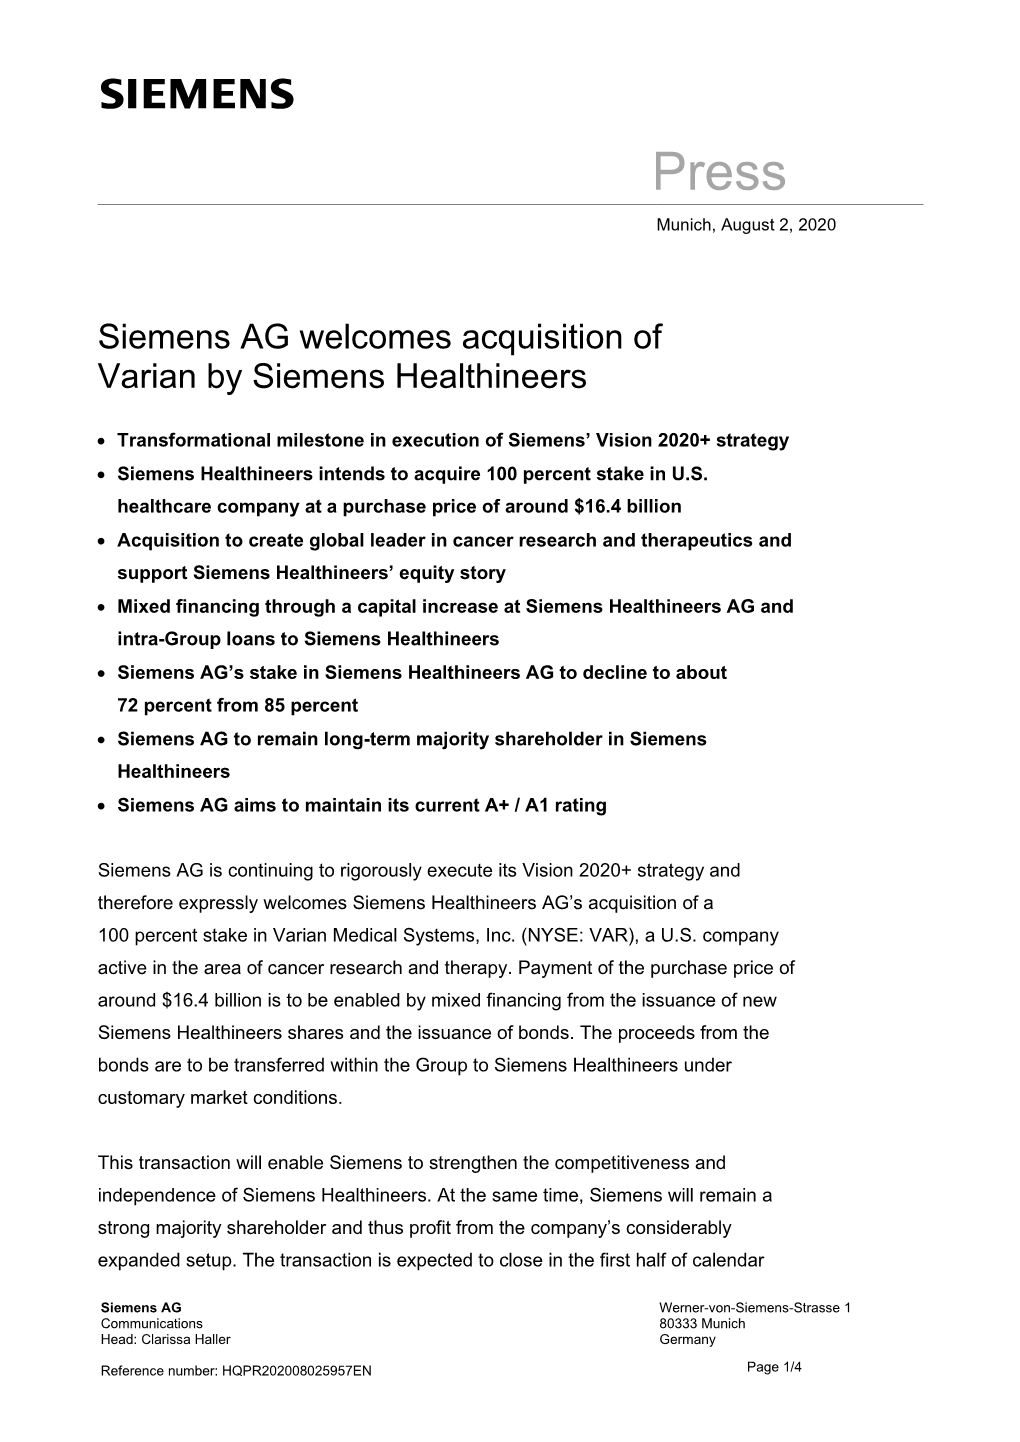 Siemens AG Welcomes Acquisition of Varian by Siemens Healthineers